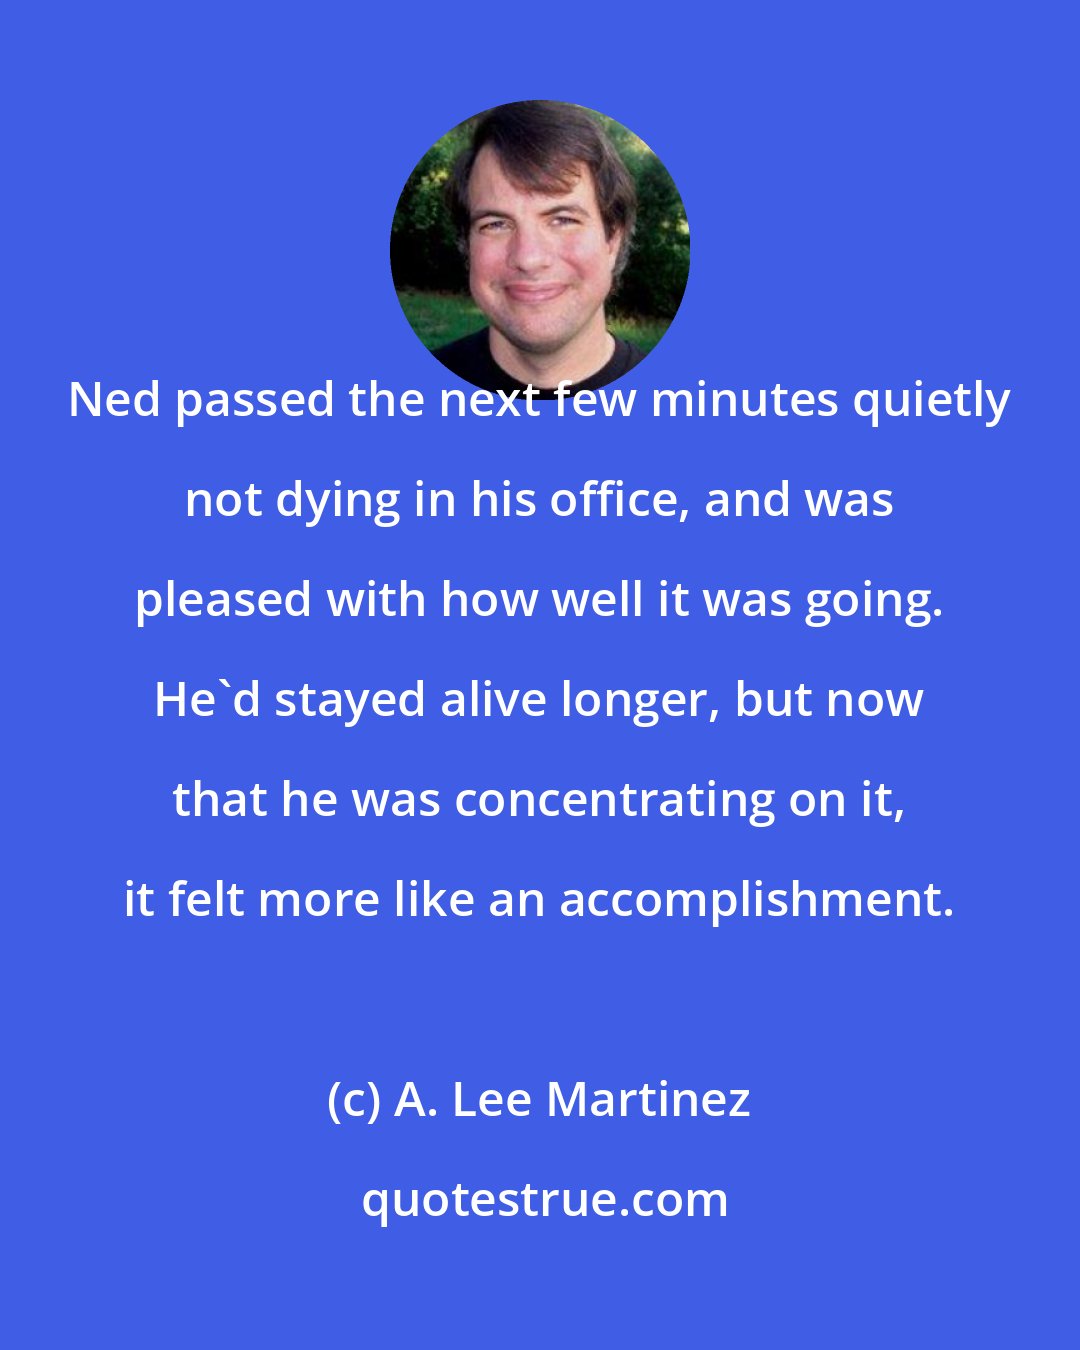 A. Lee Martinez: Ned passed the next few minutes quietly not dying in his office, and was pleased with how well it was going. He'd stayed alive longer, but now that he was concentrating on it, it felt more like an accomplishment.